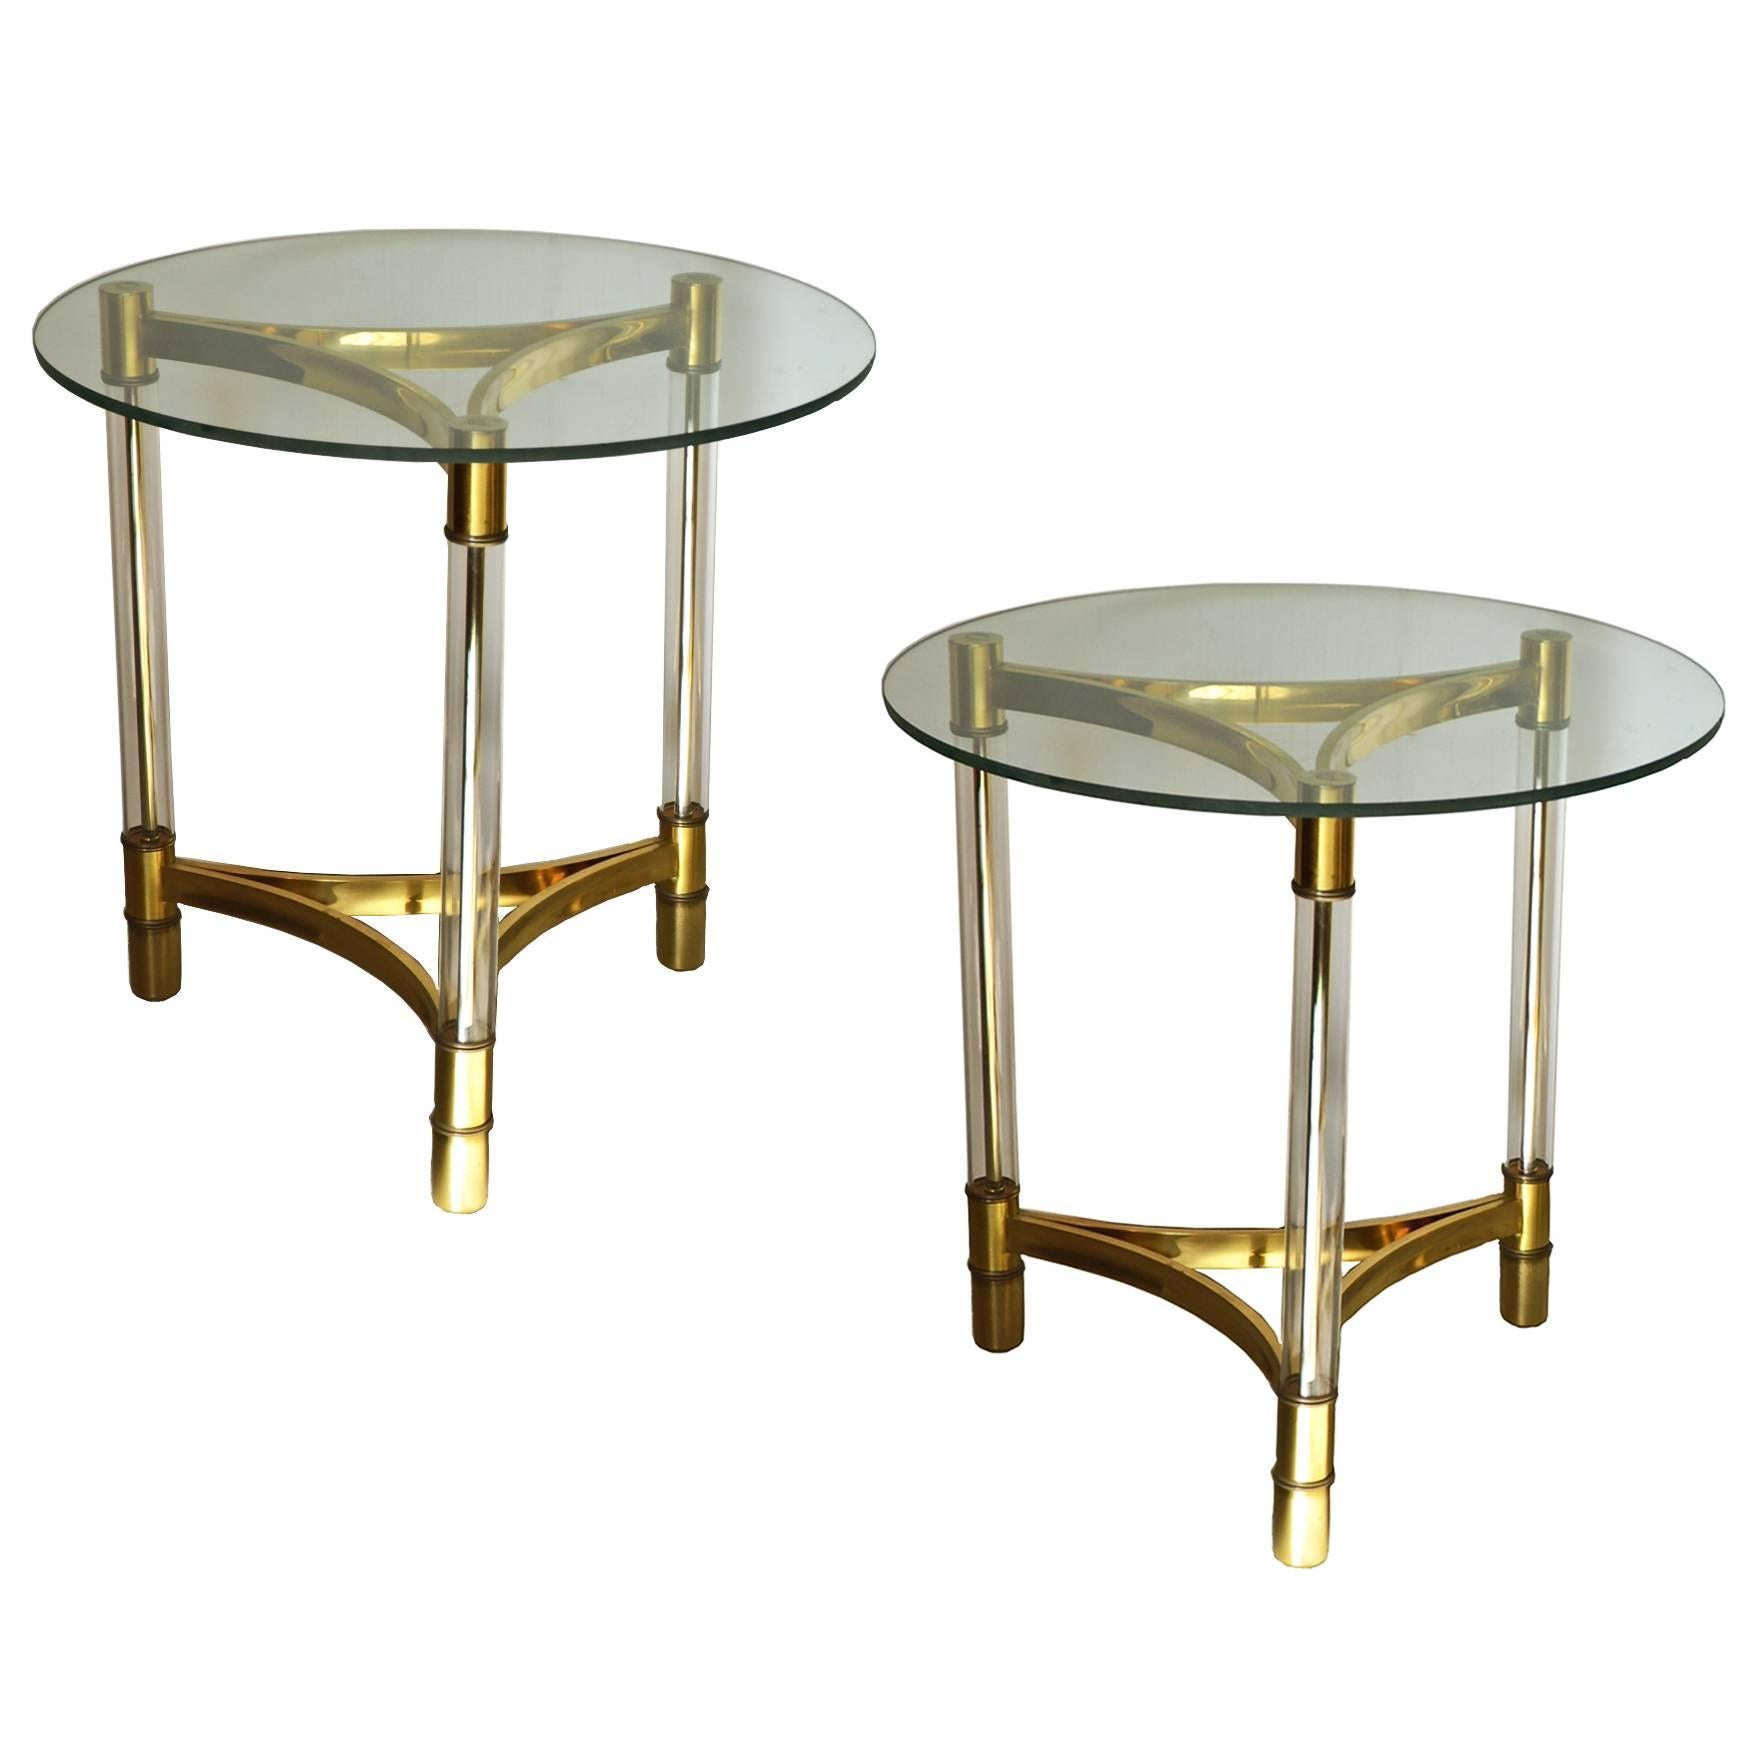 Brass and Glass Tripod Base Table Pair